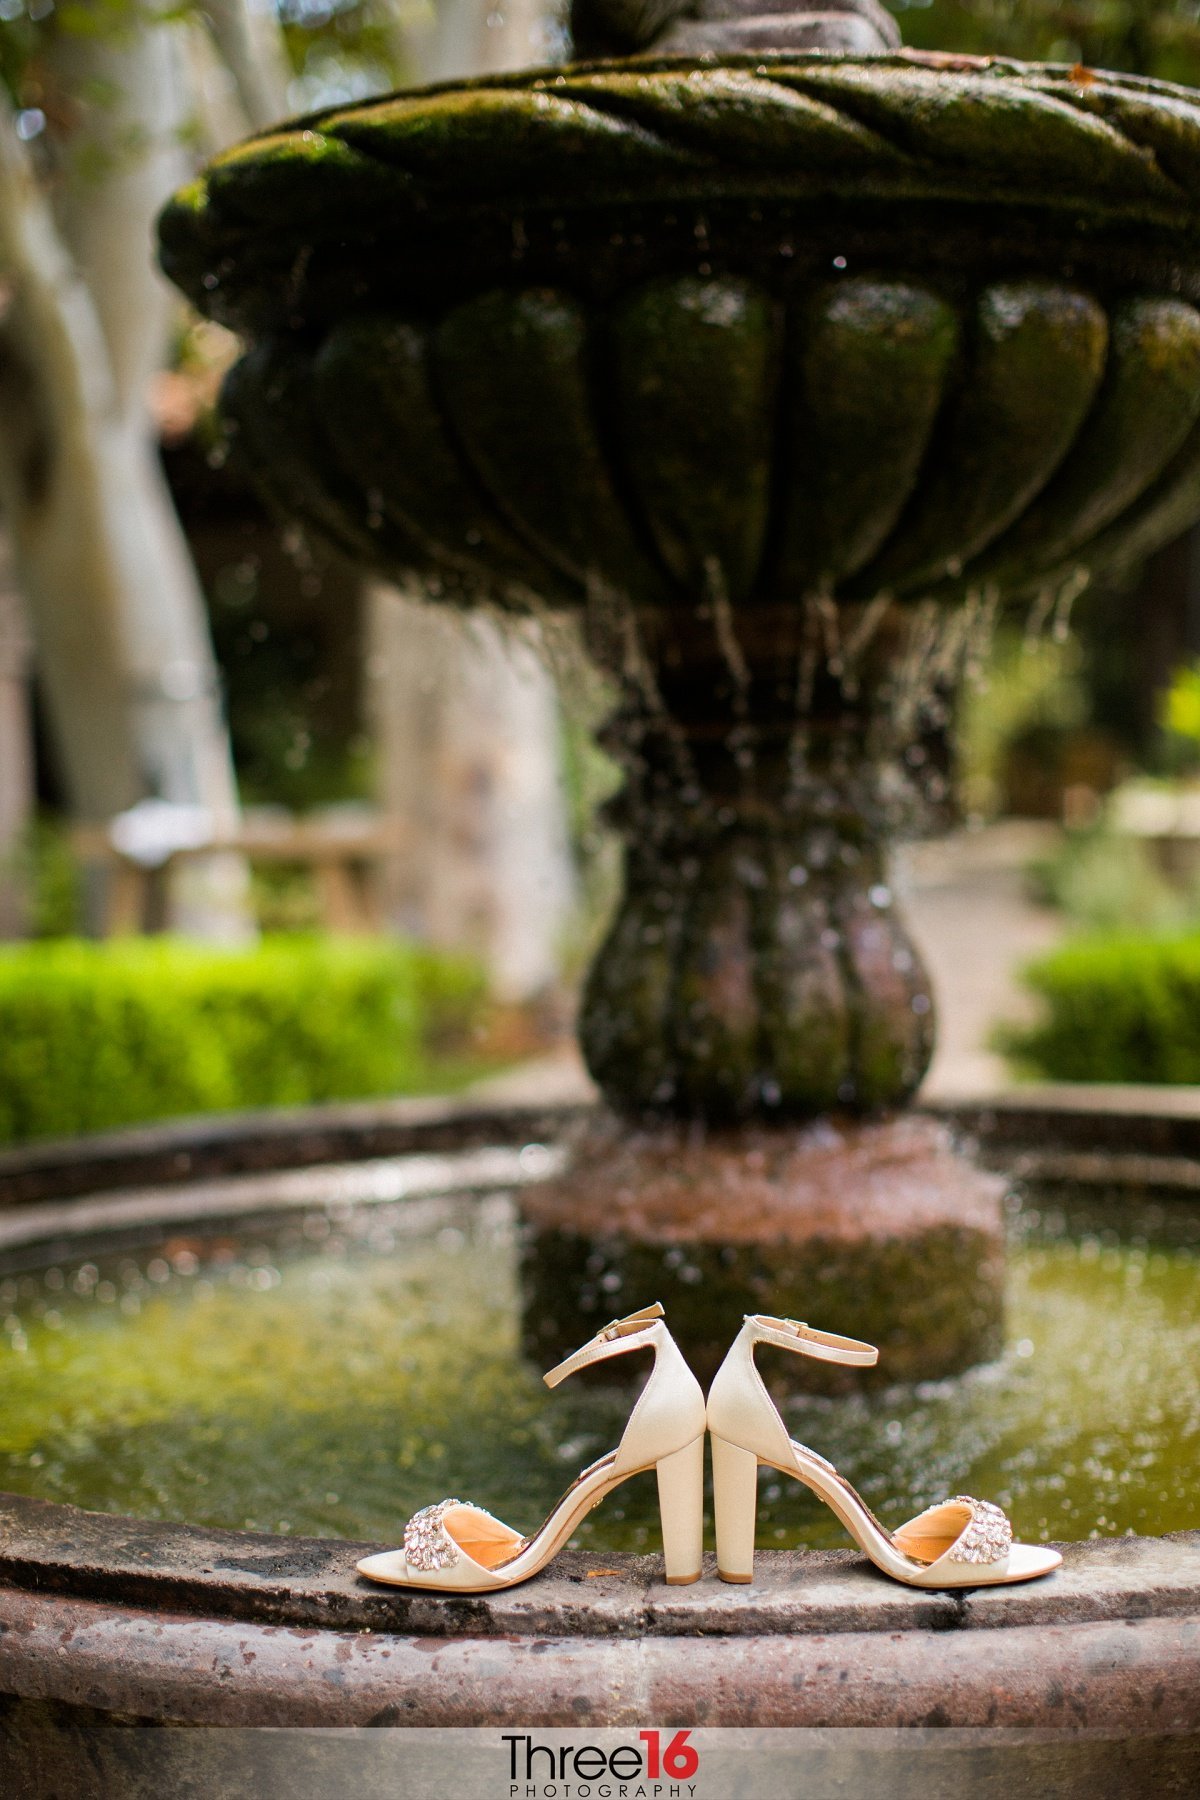 Bride's wedding shoes sit back to back on the edge of a water fountain